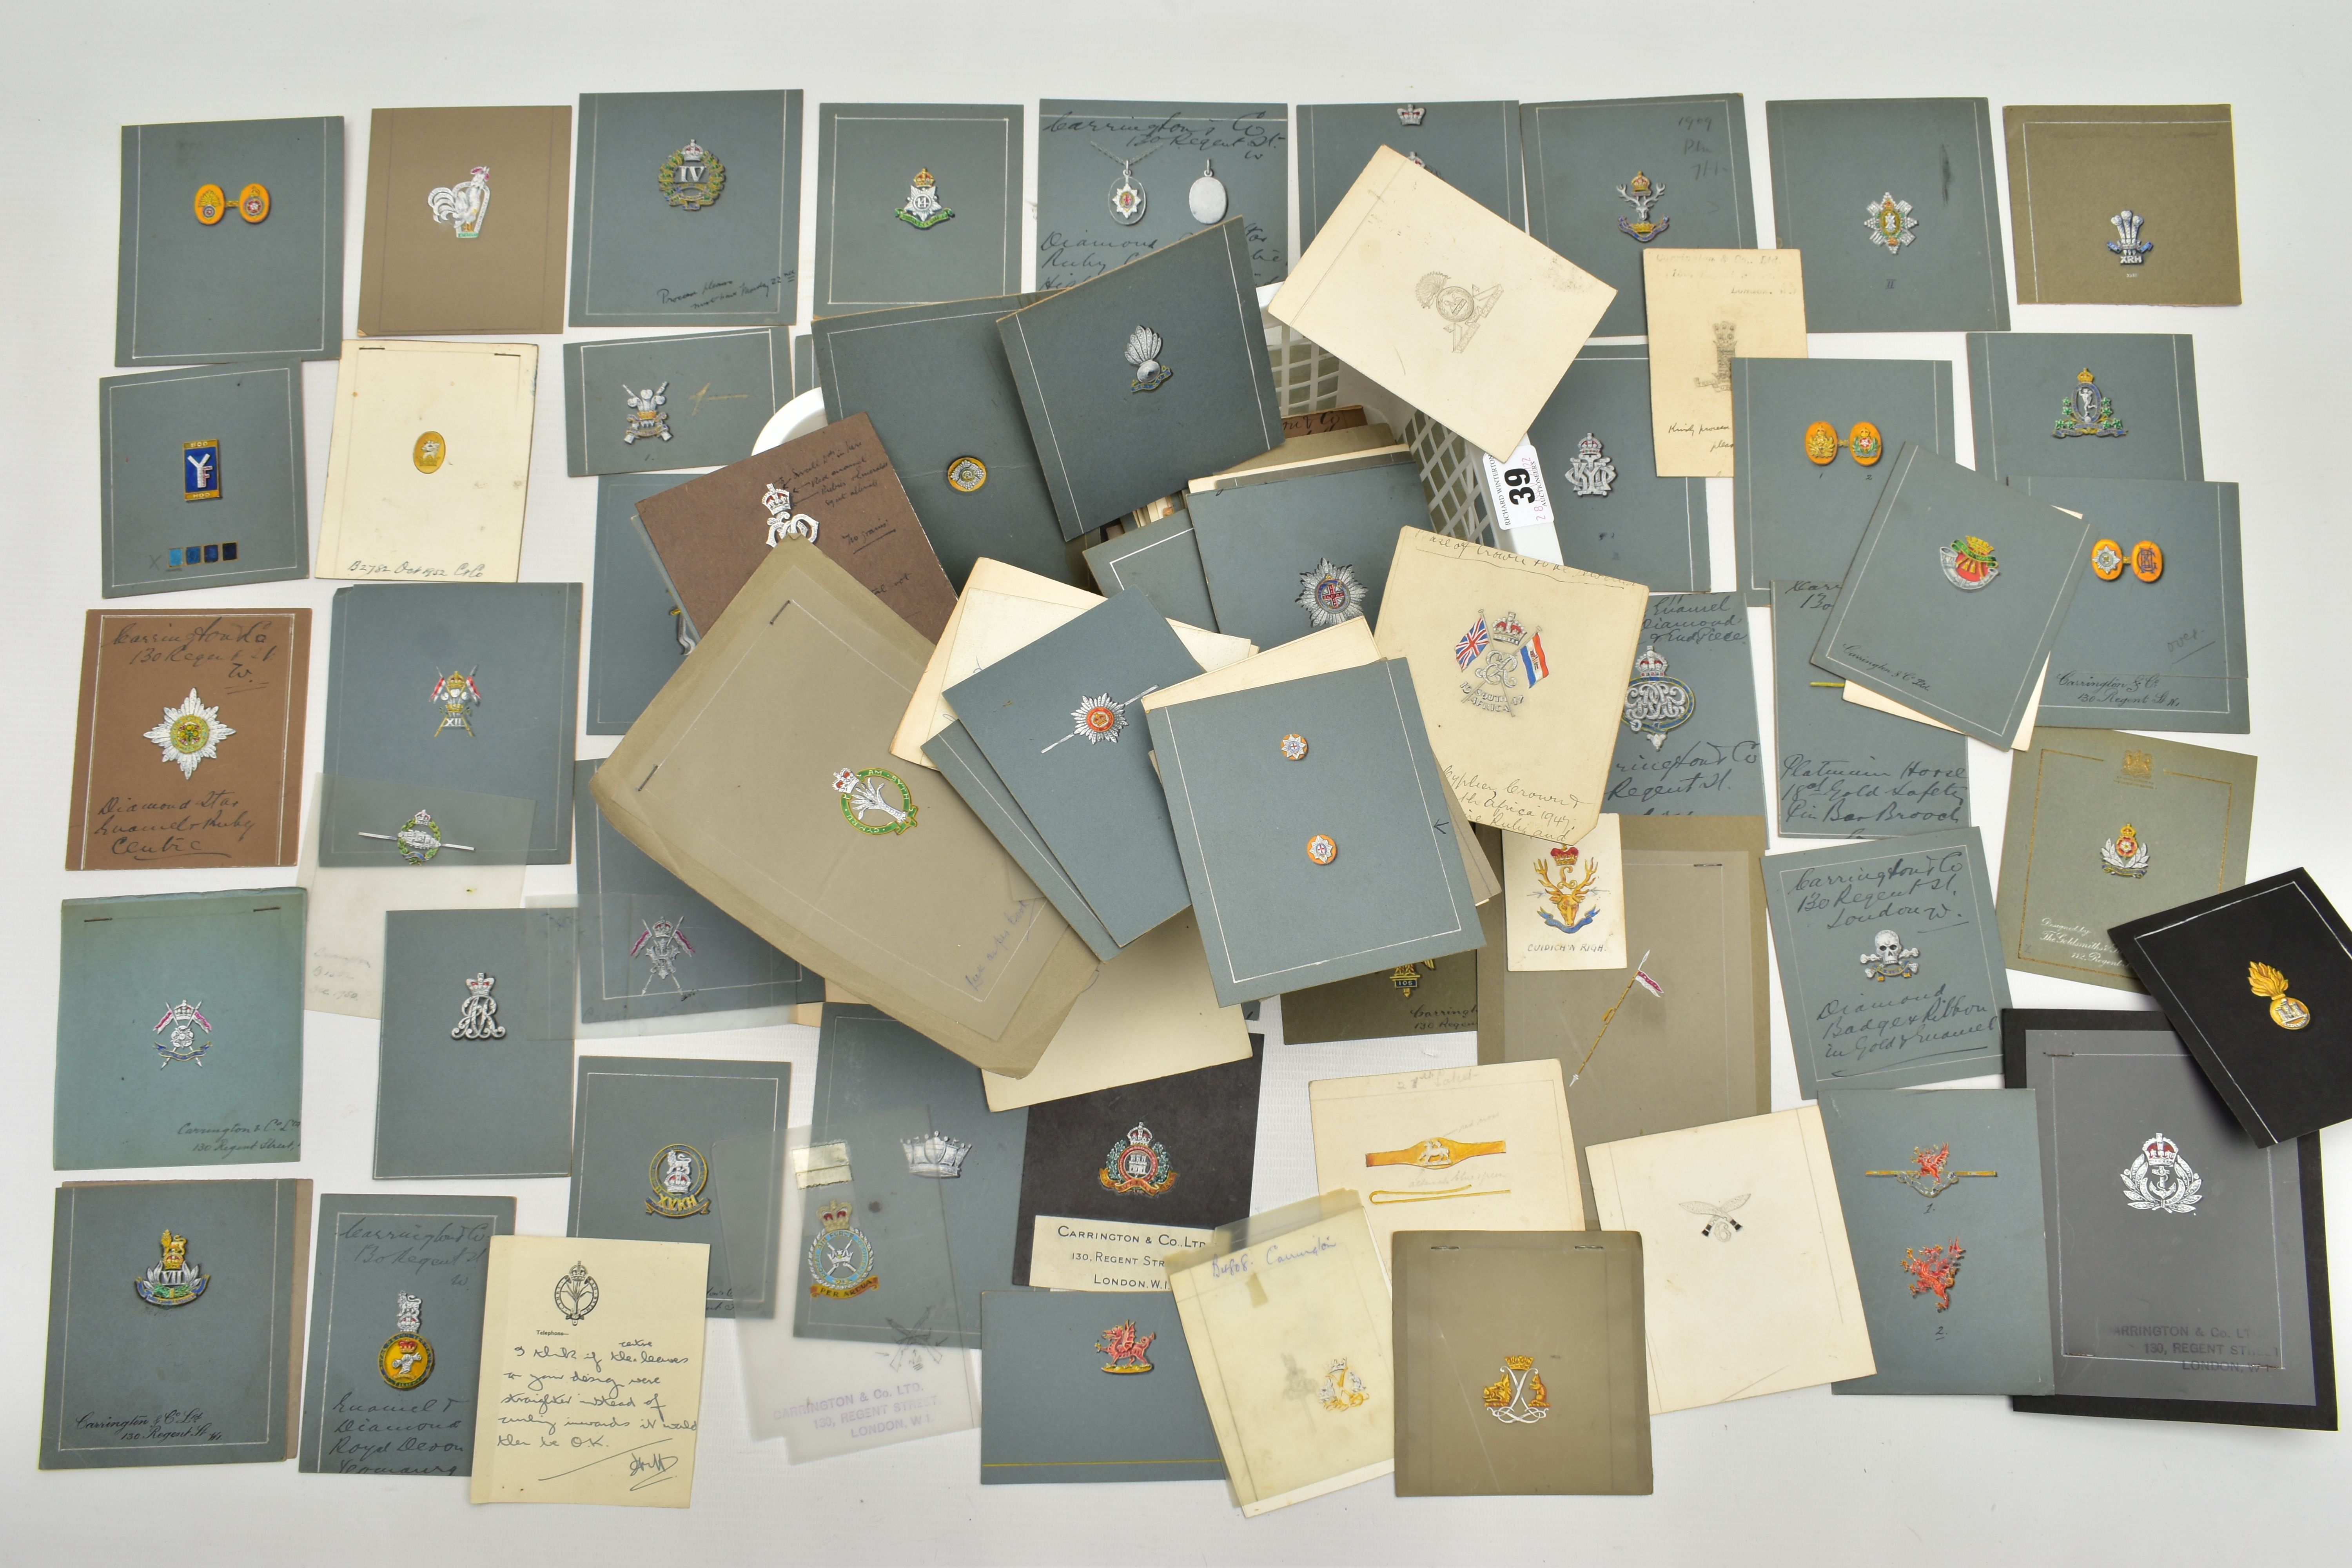 A LARGE COLLECTION OF 'CARRINGTON & CO MILITARY SILVERSMITHS' EARLY TO MID 20TH CENTURY GOUACHE